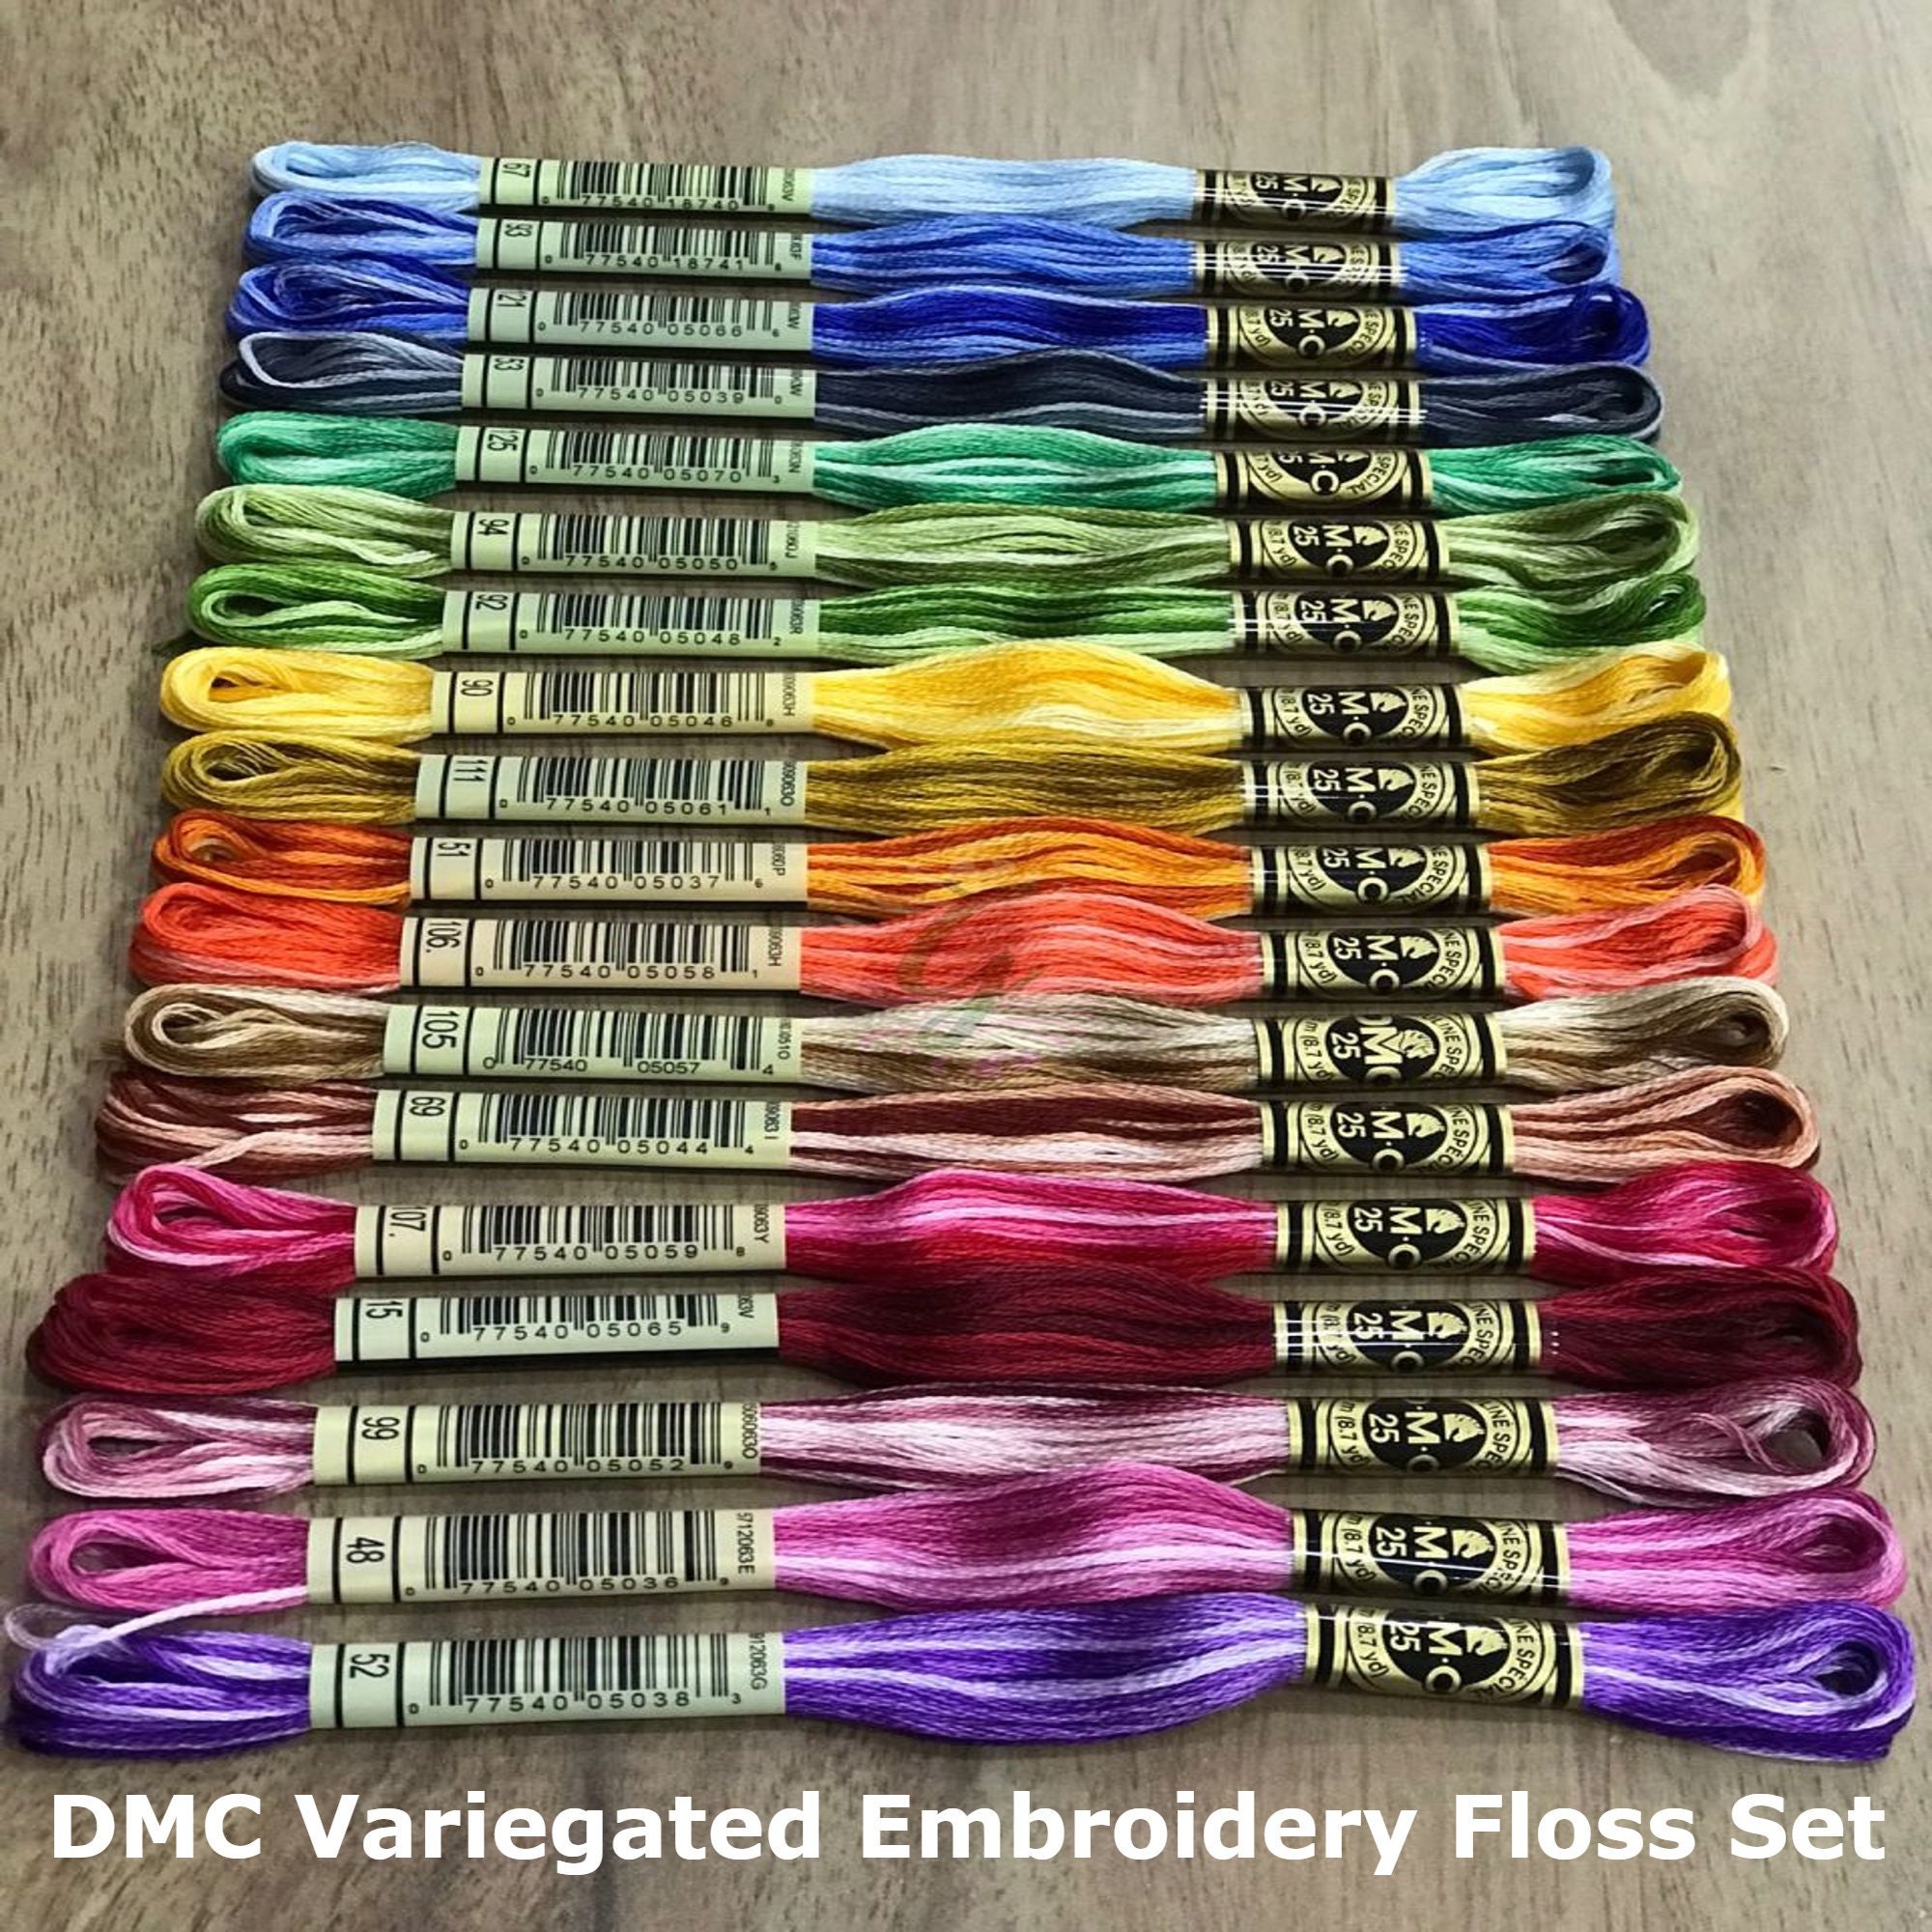 DMC Variegated Embroidery Floss Set, Full Set of 18 Colours